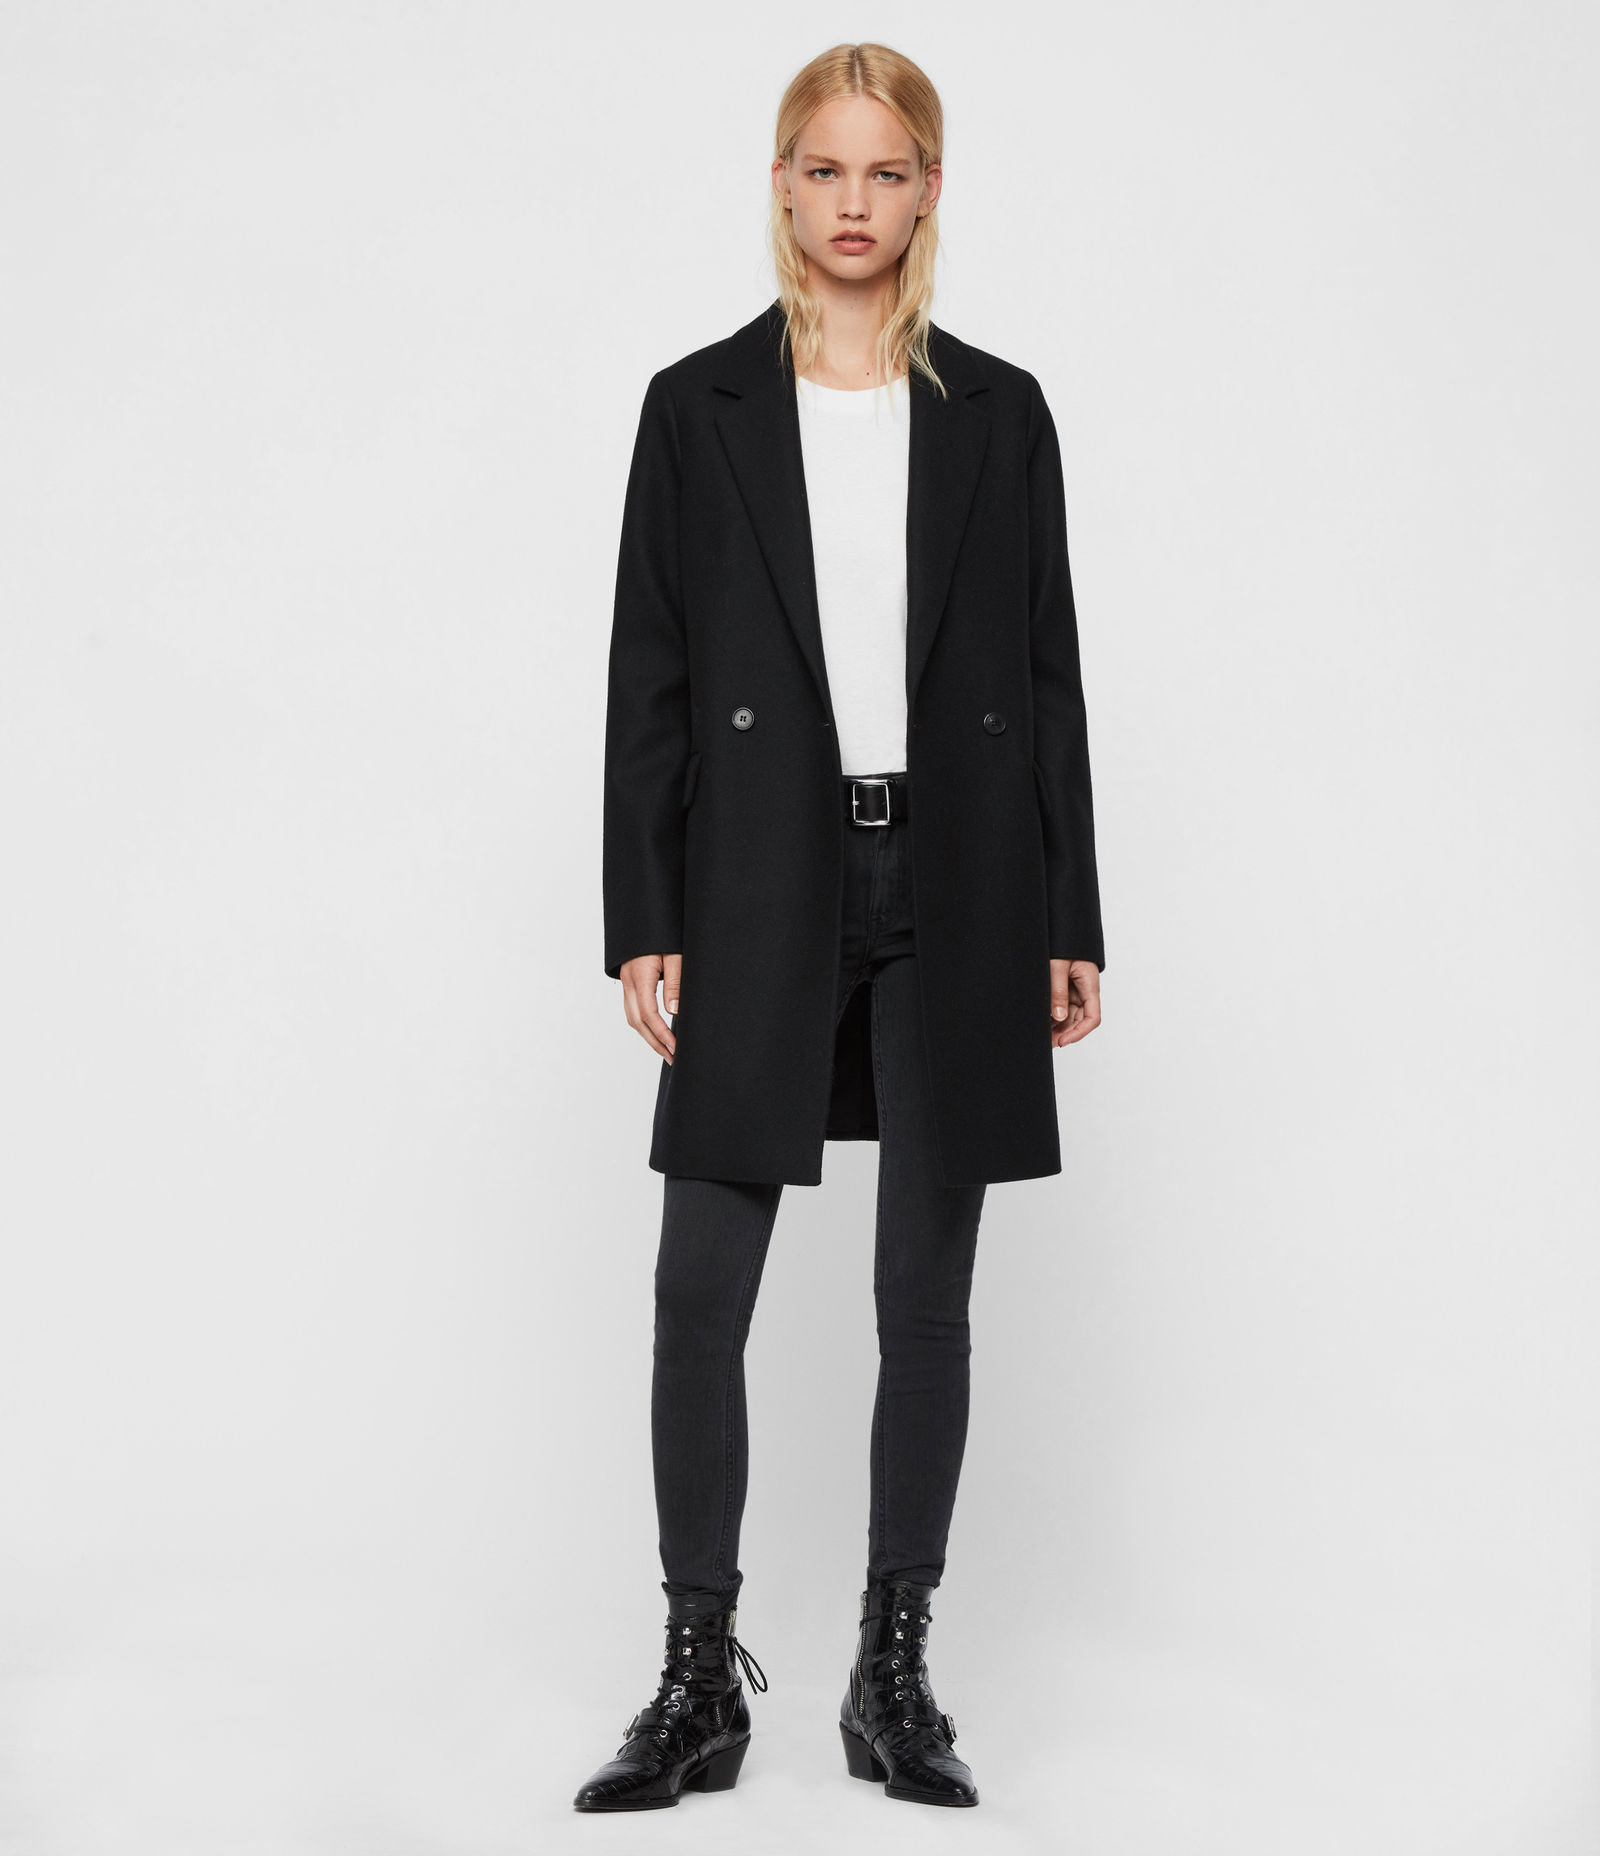 AllSaints Is Having A Sale With Up To 40% Off, So Get Ready To Slay At ...